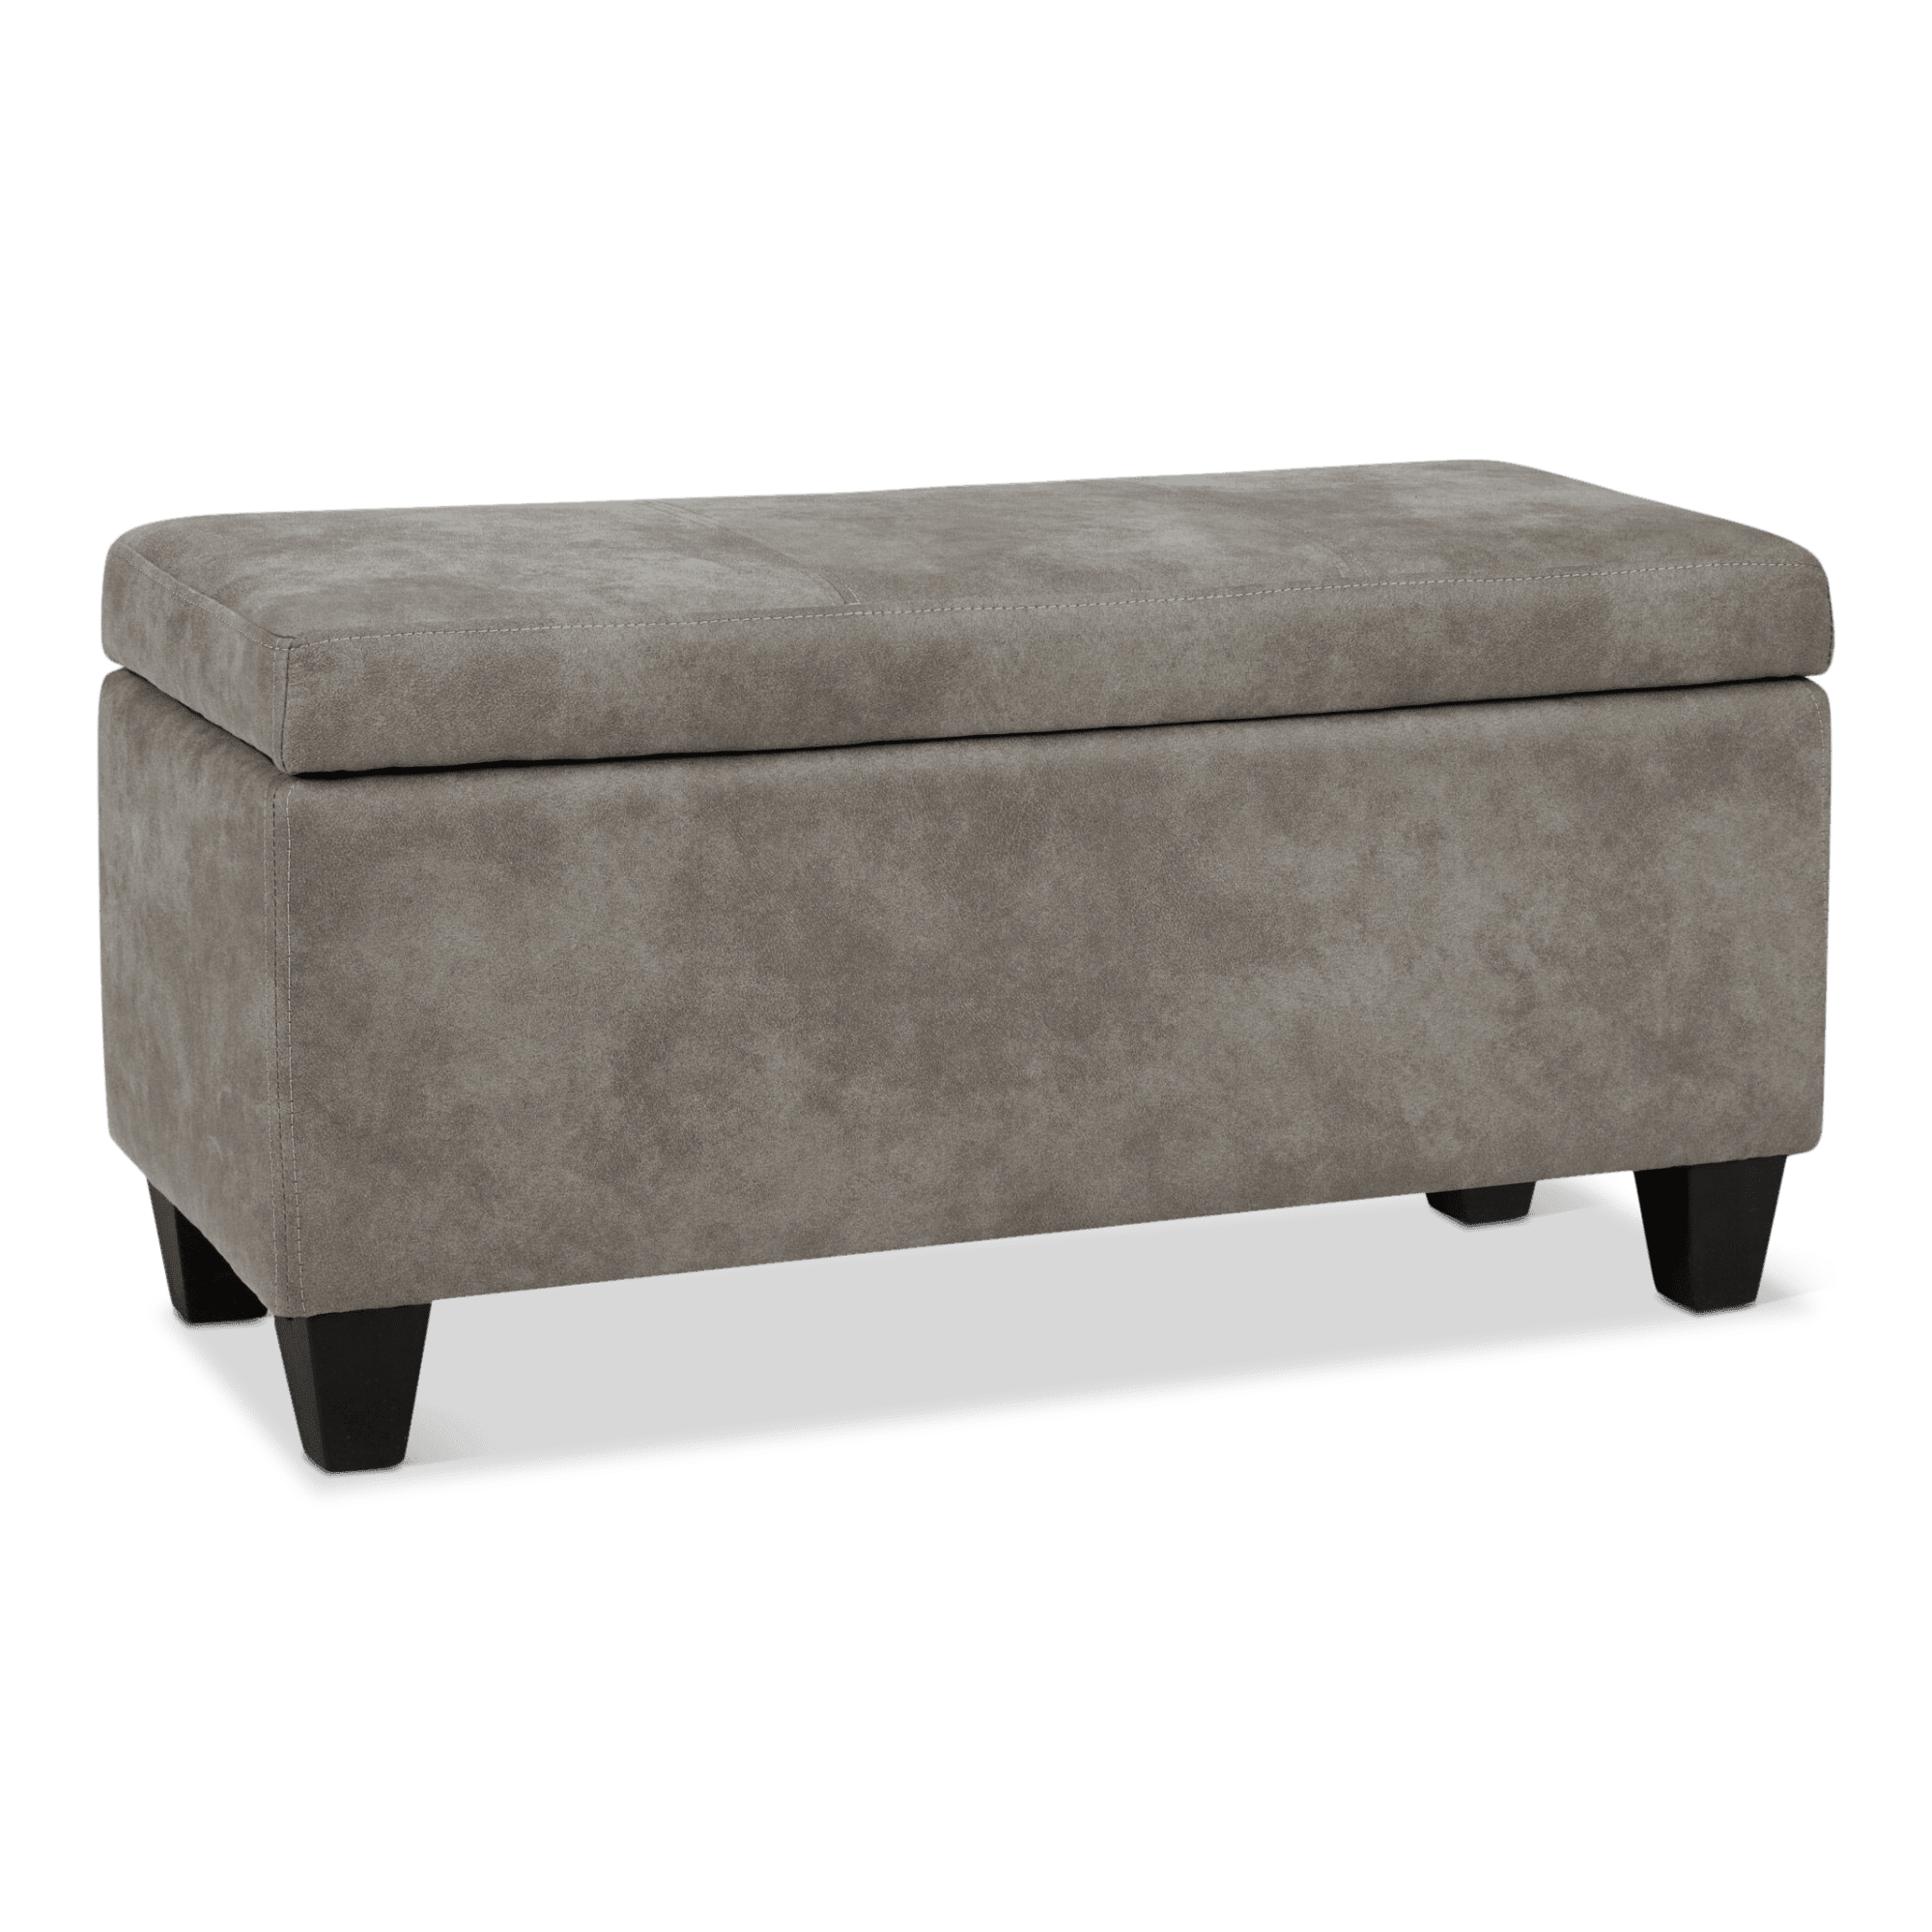 Textured Faux Leather Storage Bench